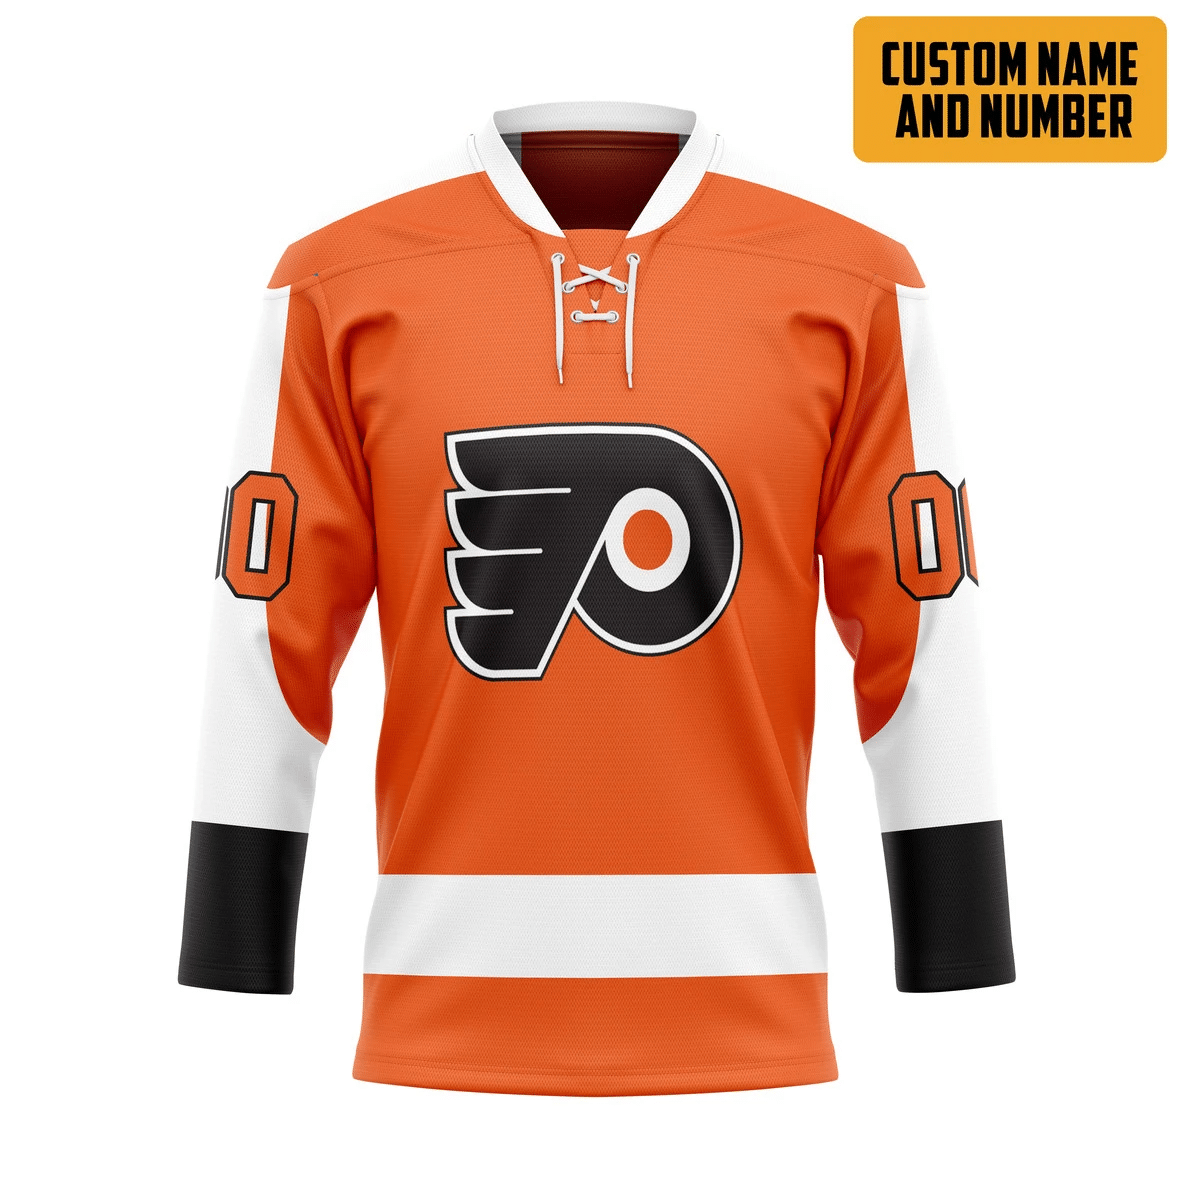 The hockey jersey is one of the most important items to have as a sports fan. 207